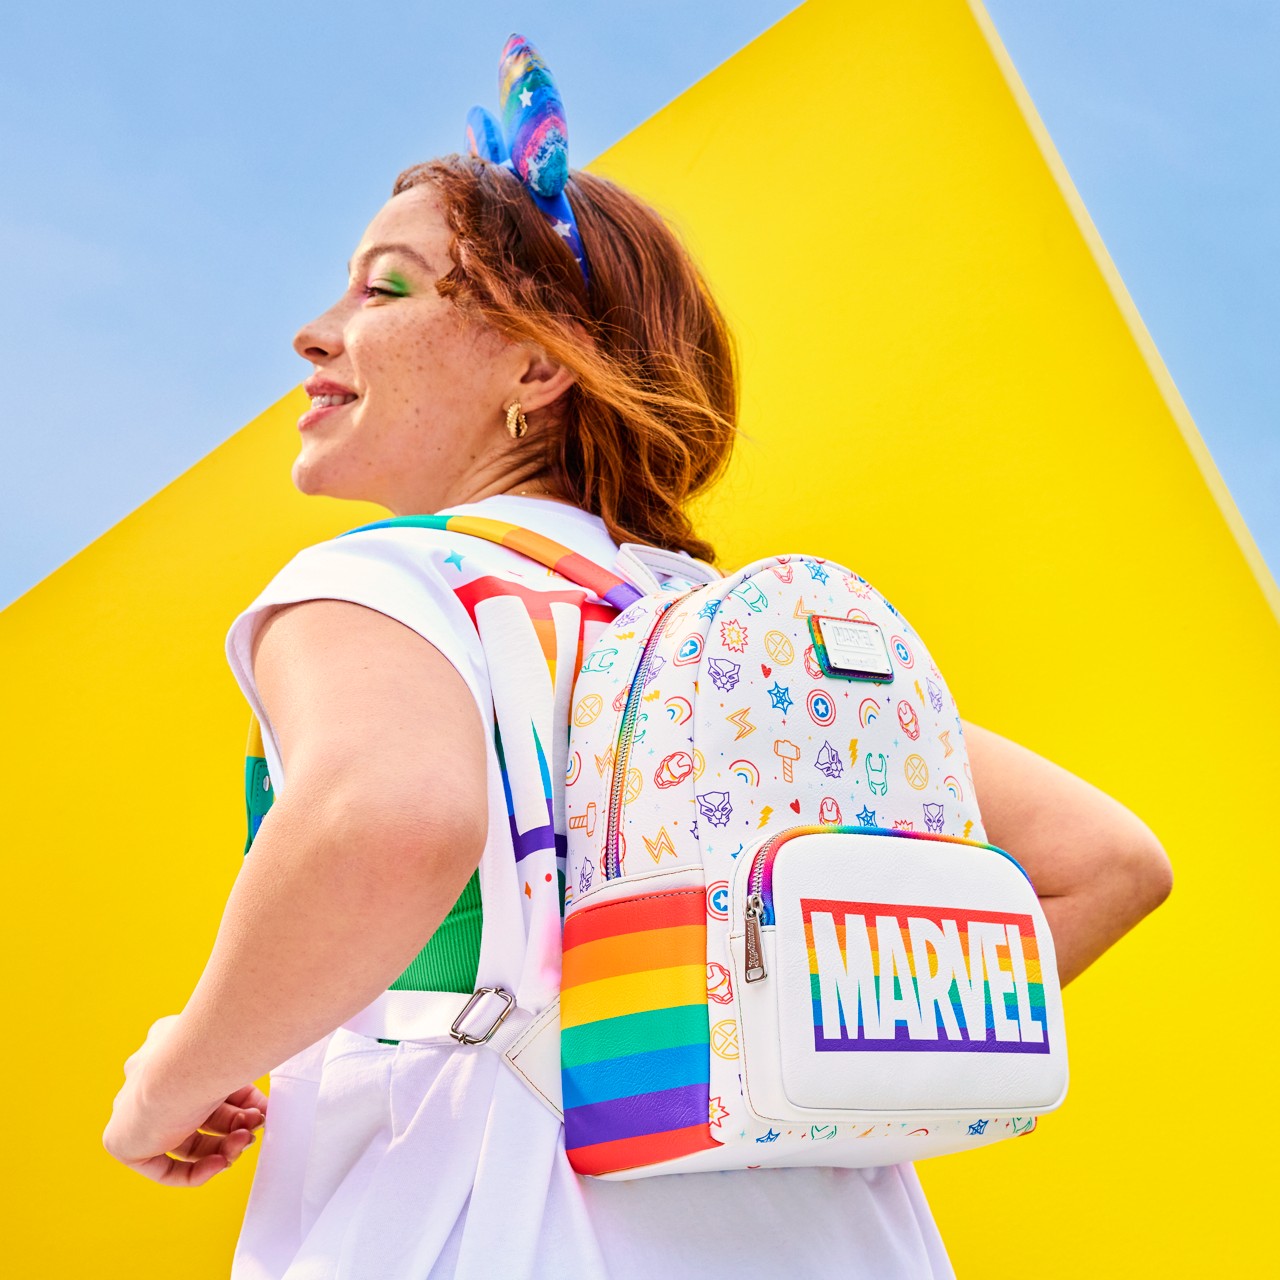 Marvel Pride Collection Loungefly Mini Backpack